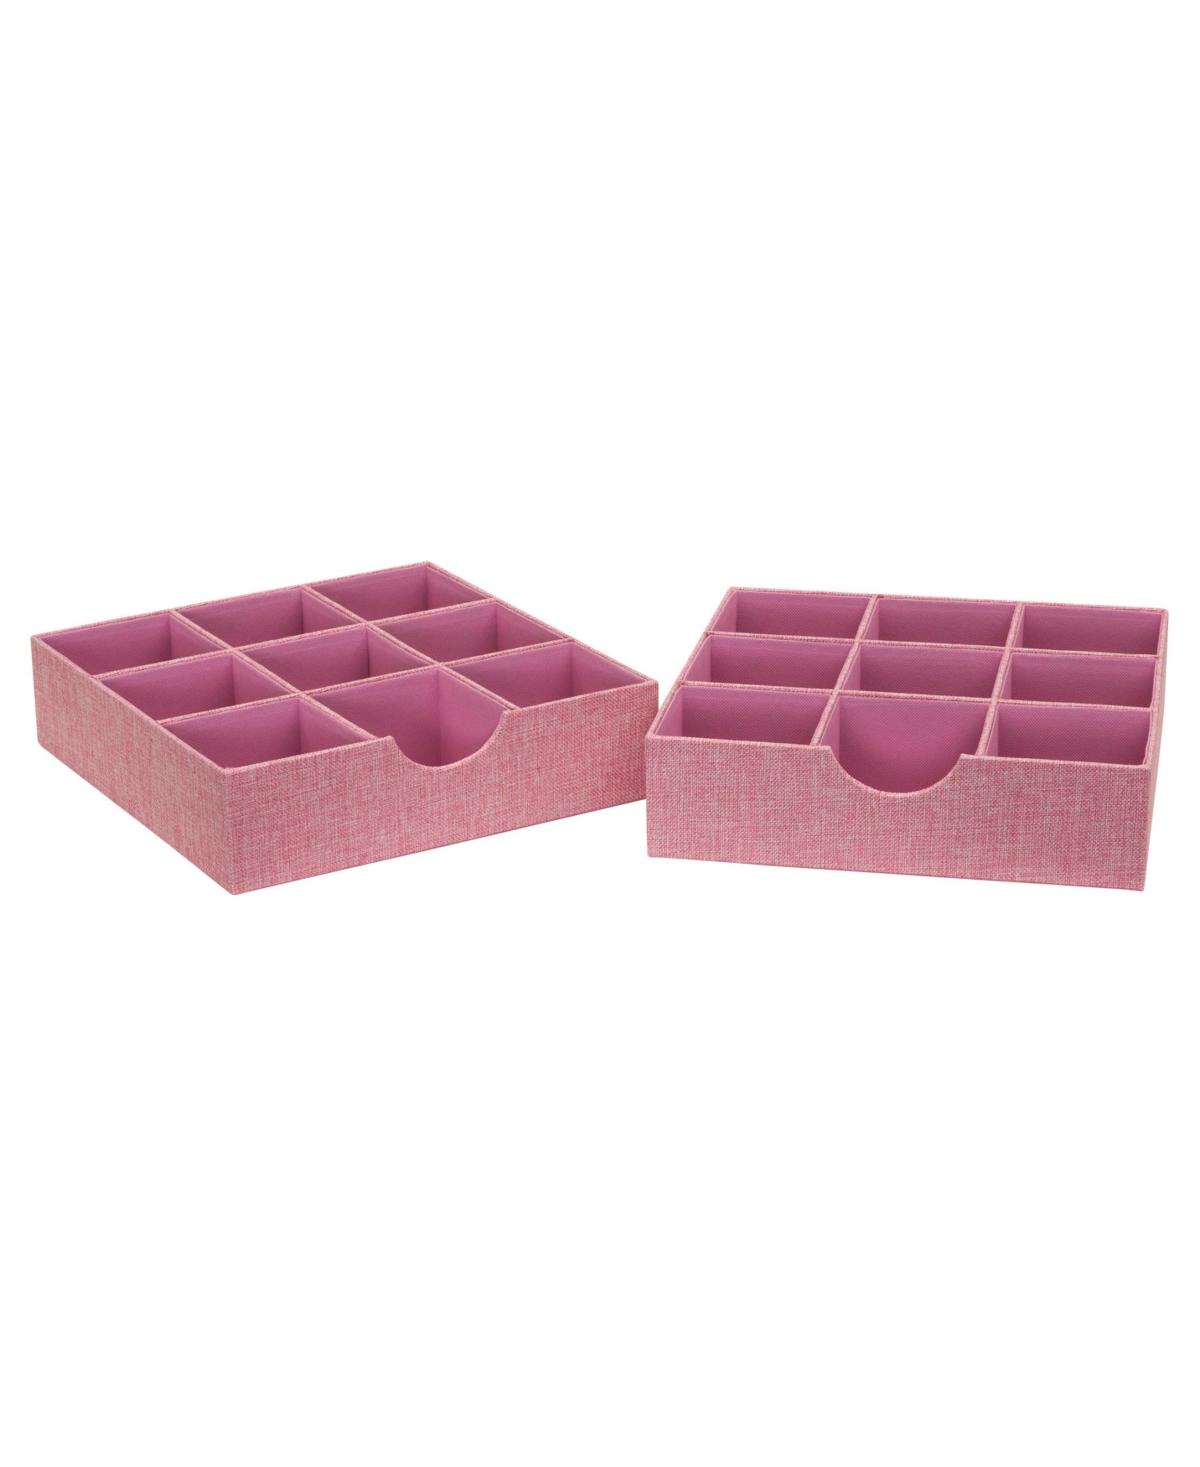 9-Compartment Drawer Organizers Pack of 2 - Pink